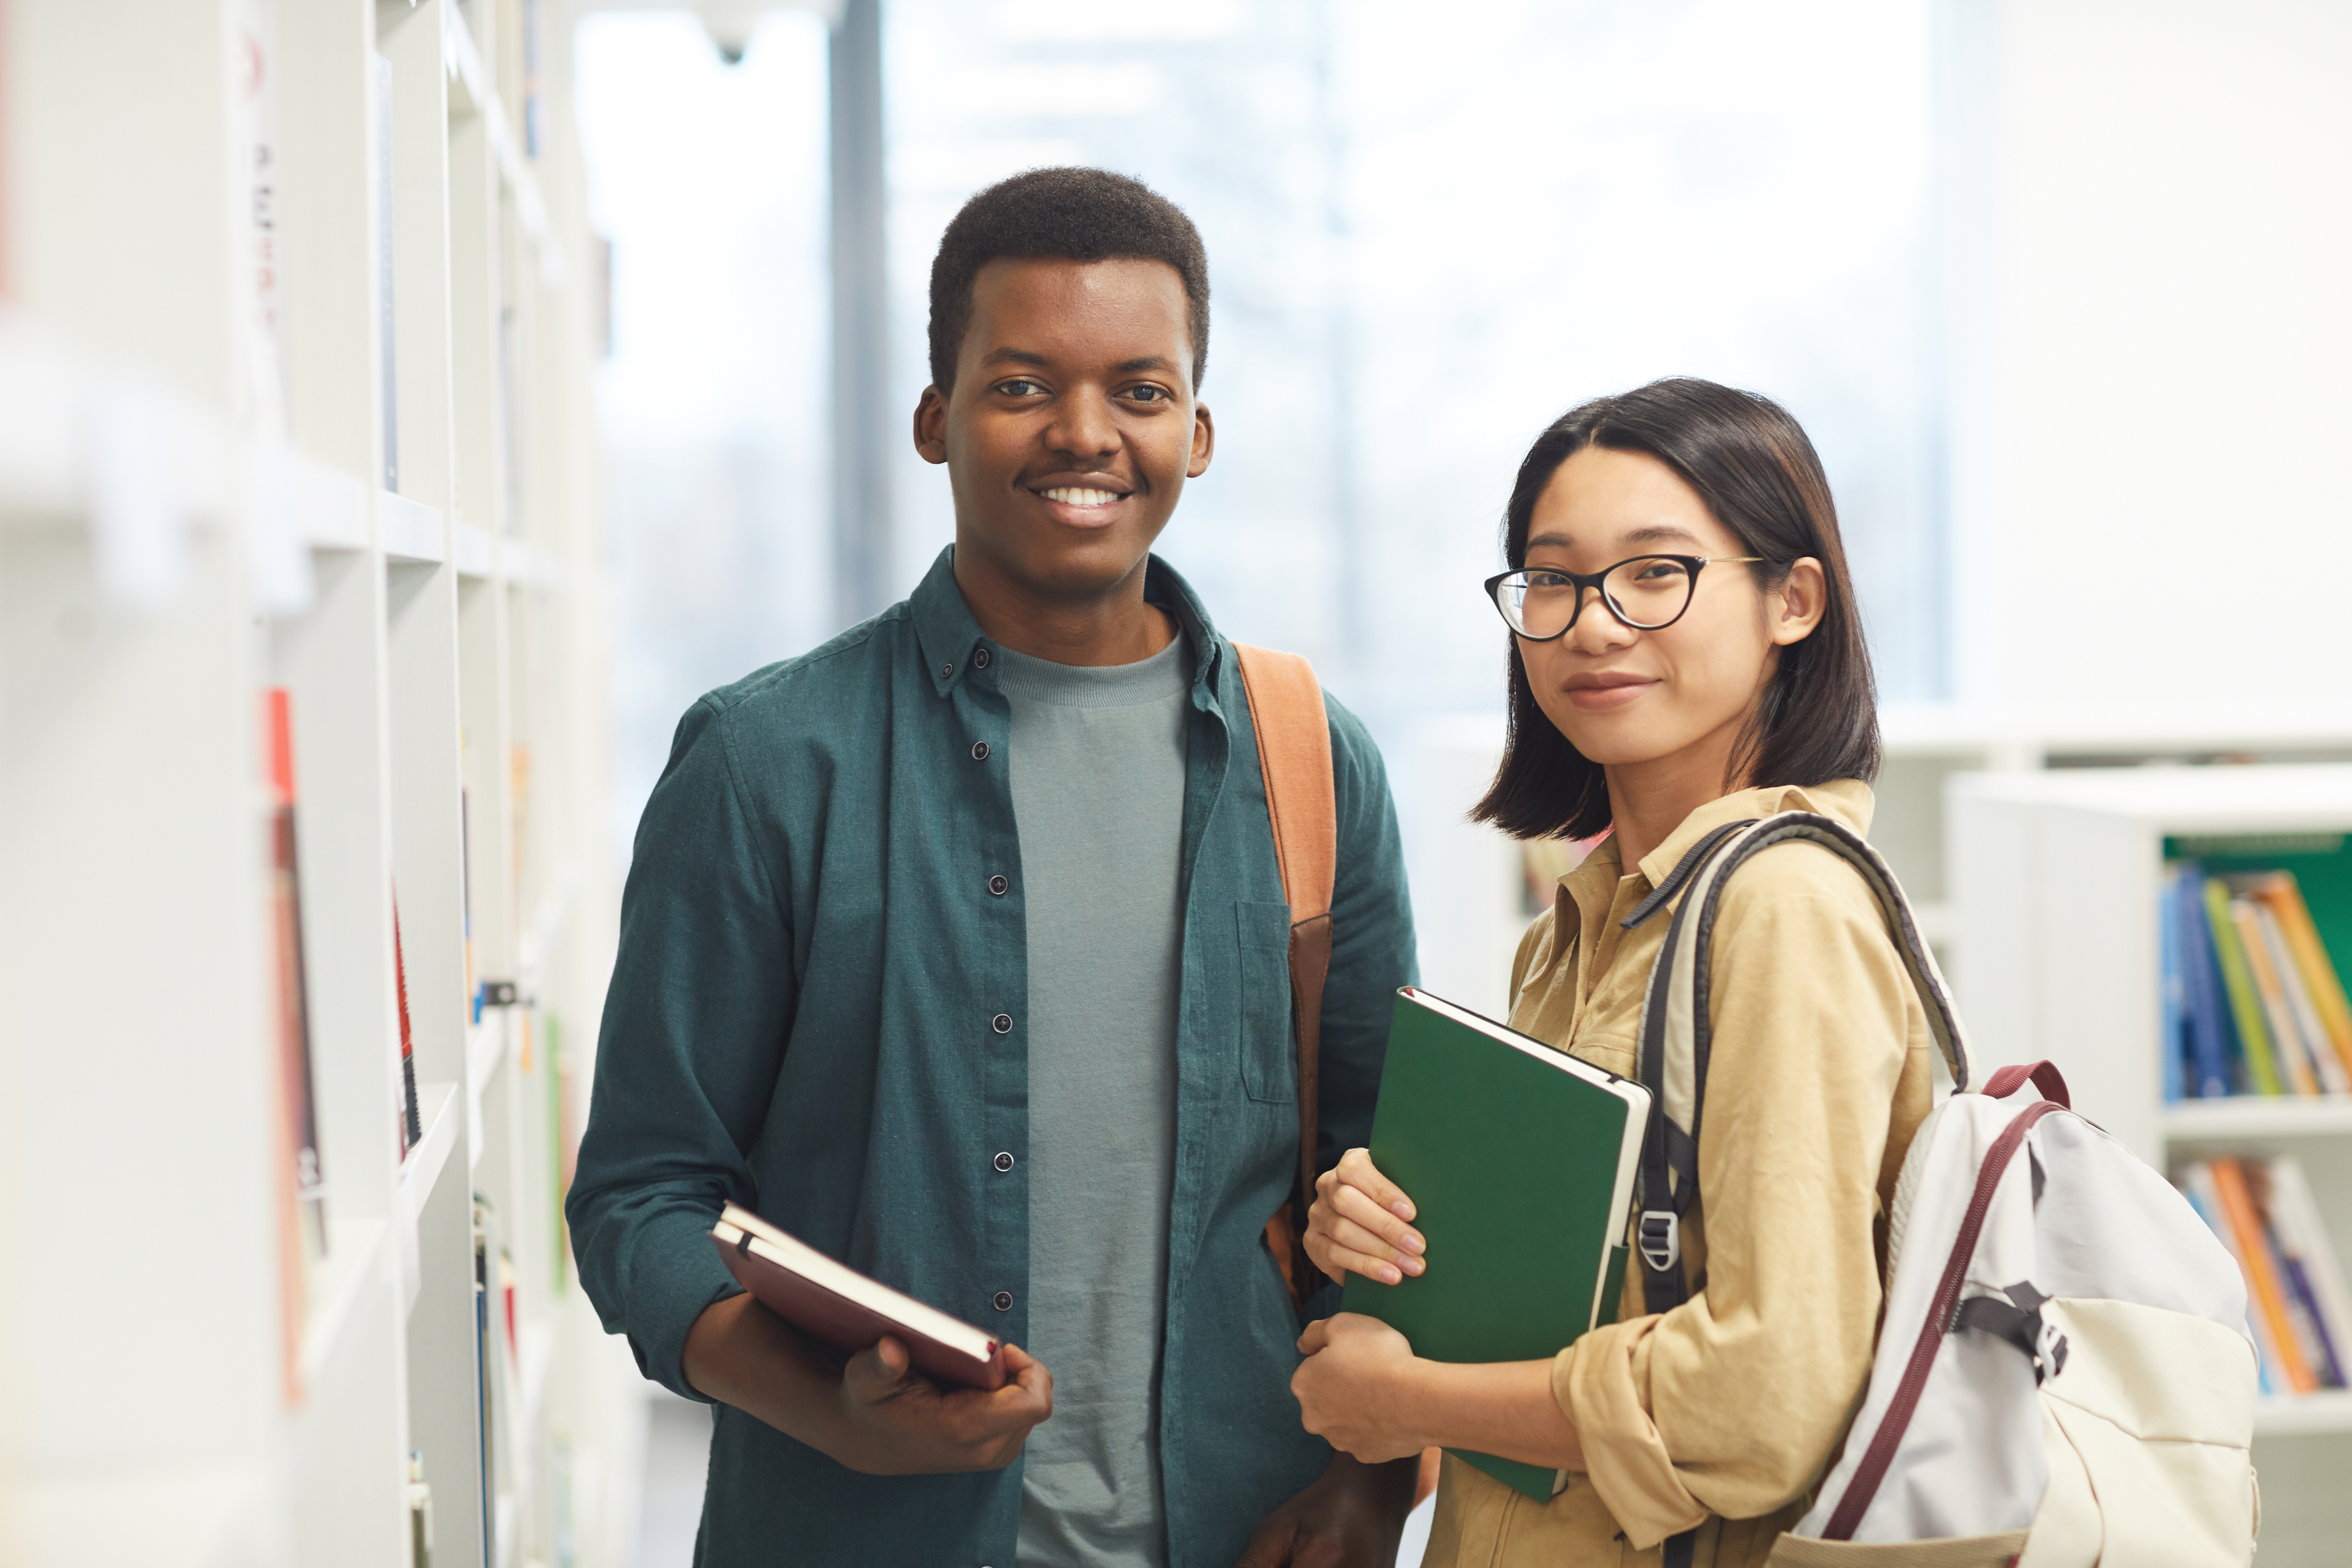 A male student of African descent stands next to a female student of asian descent. Both are holding books with bakcpacks draped over their shoulders.